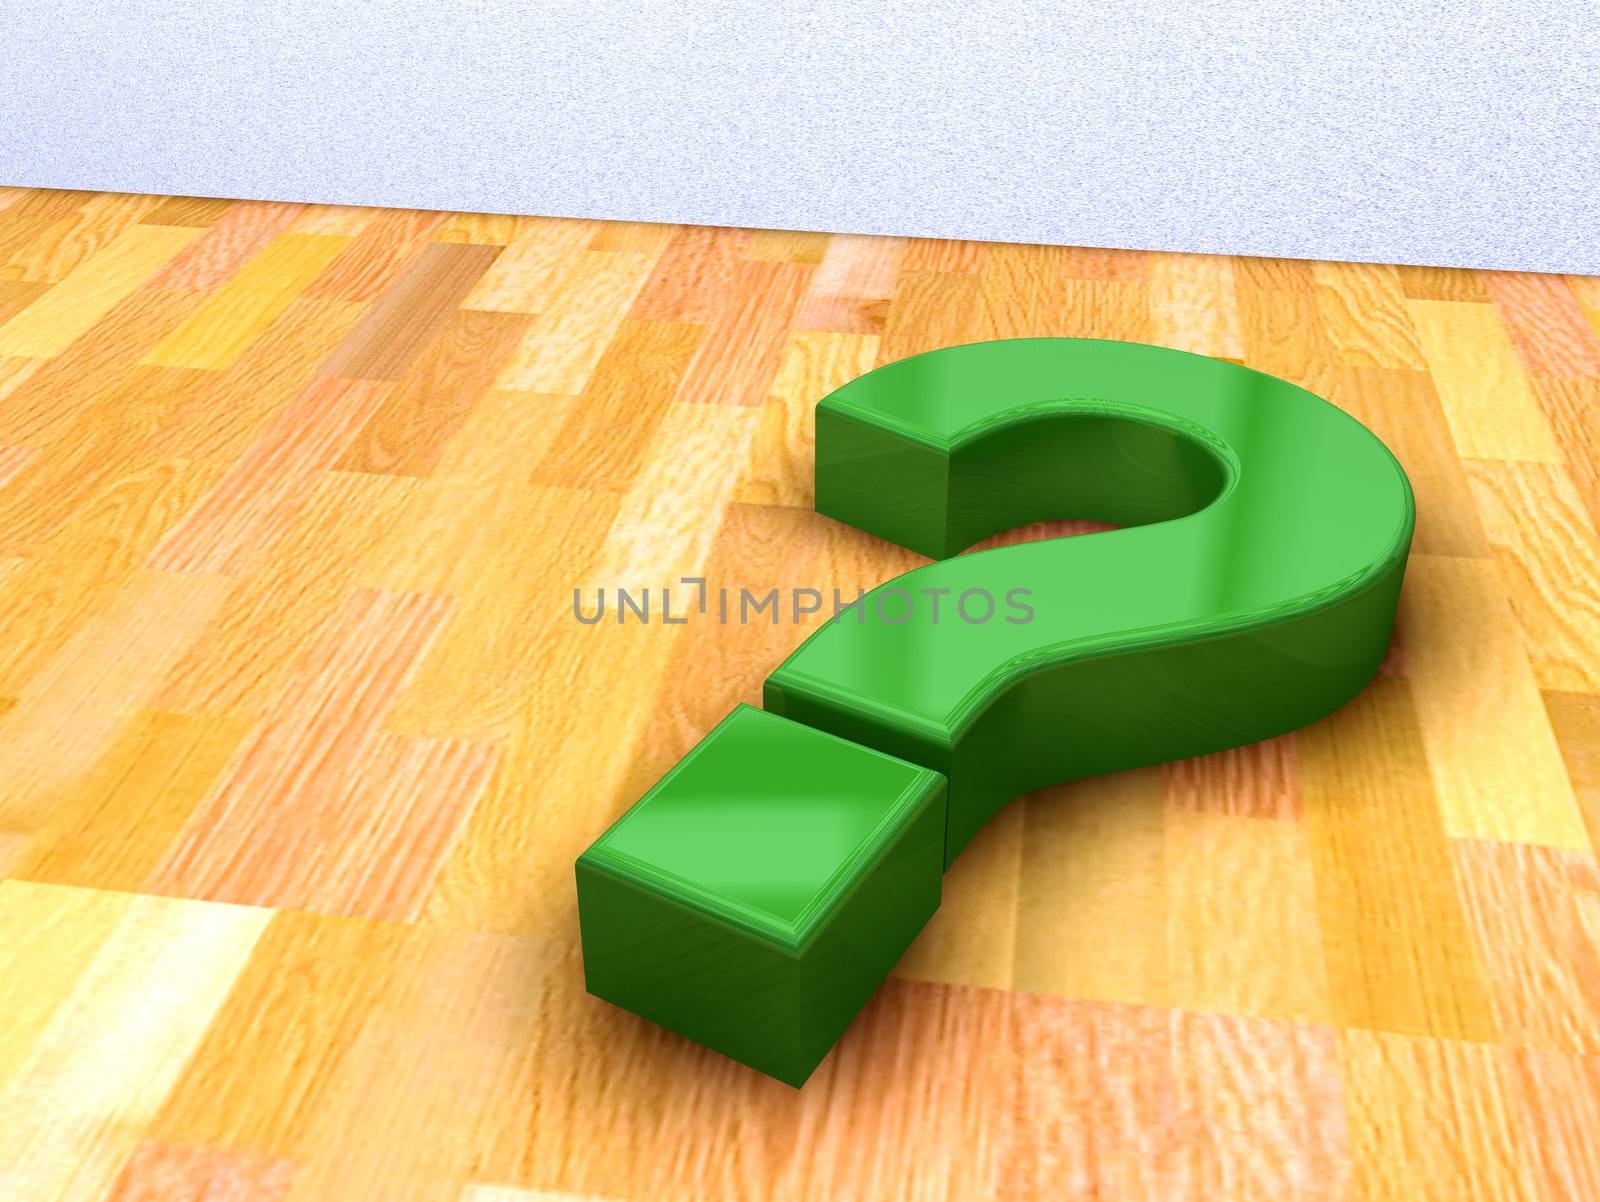 3d image of green question mark on a wood floor